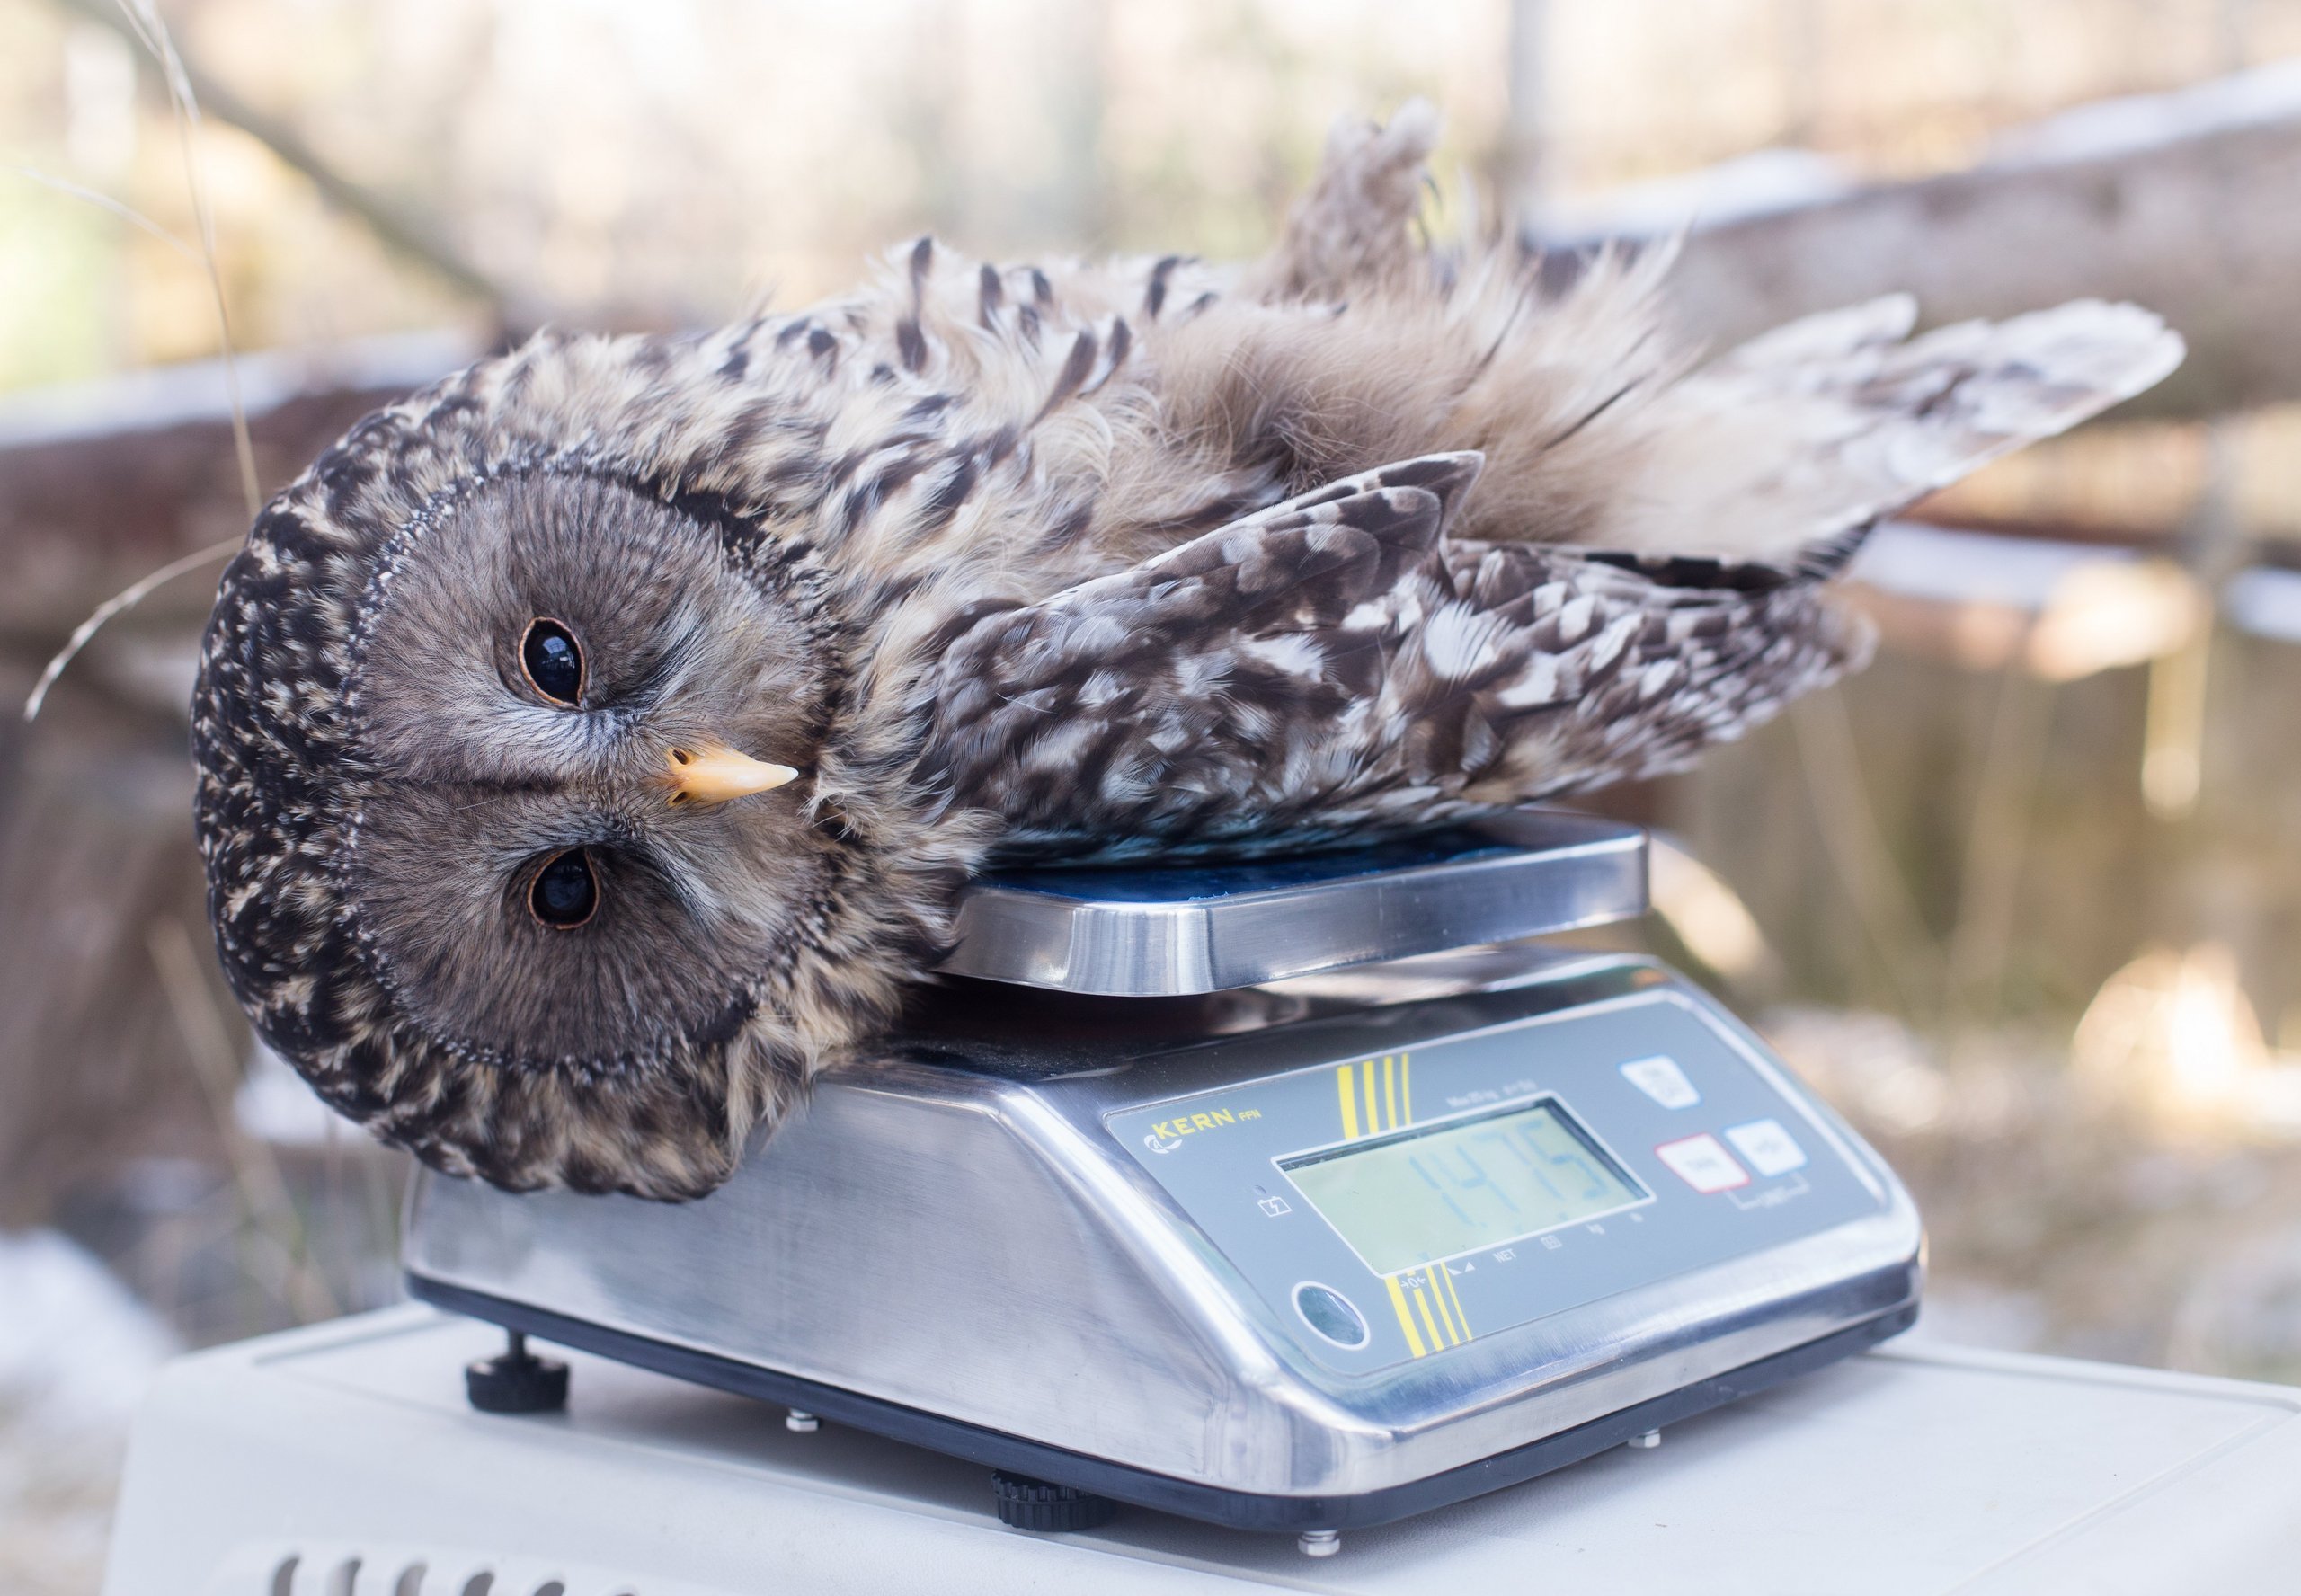 Ural owl on a scale